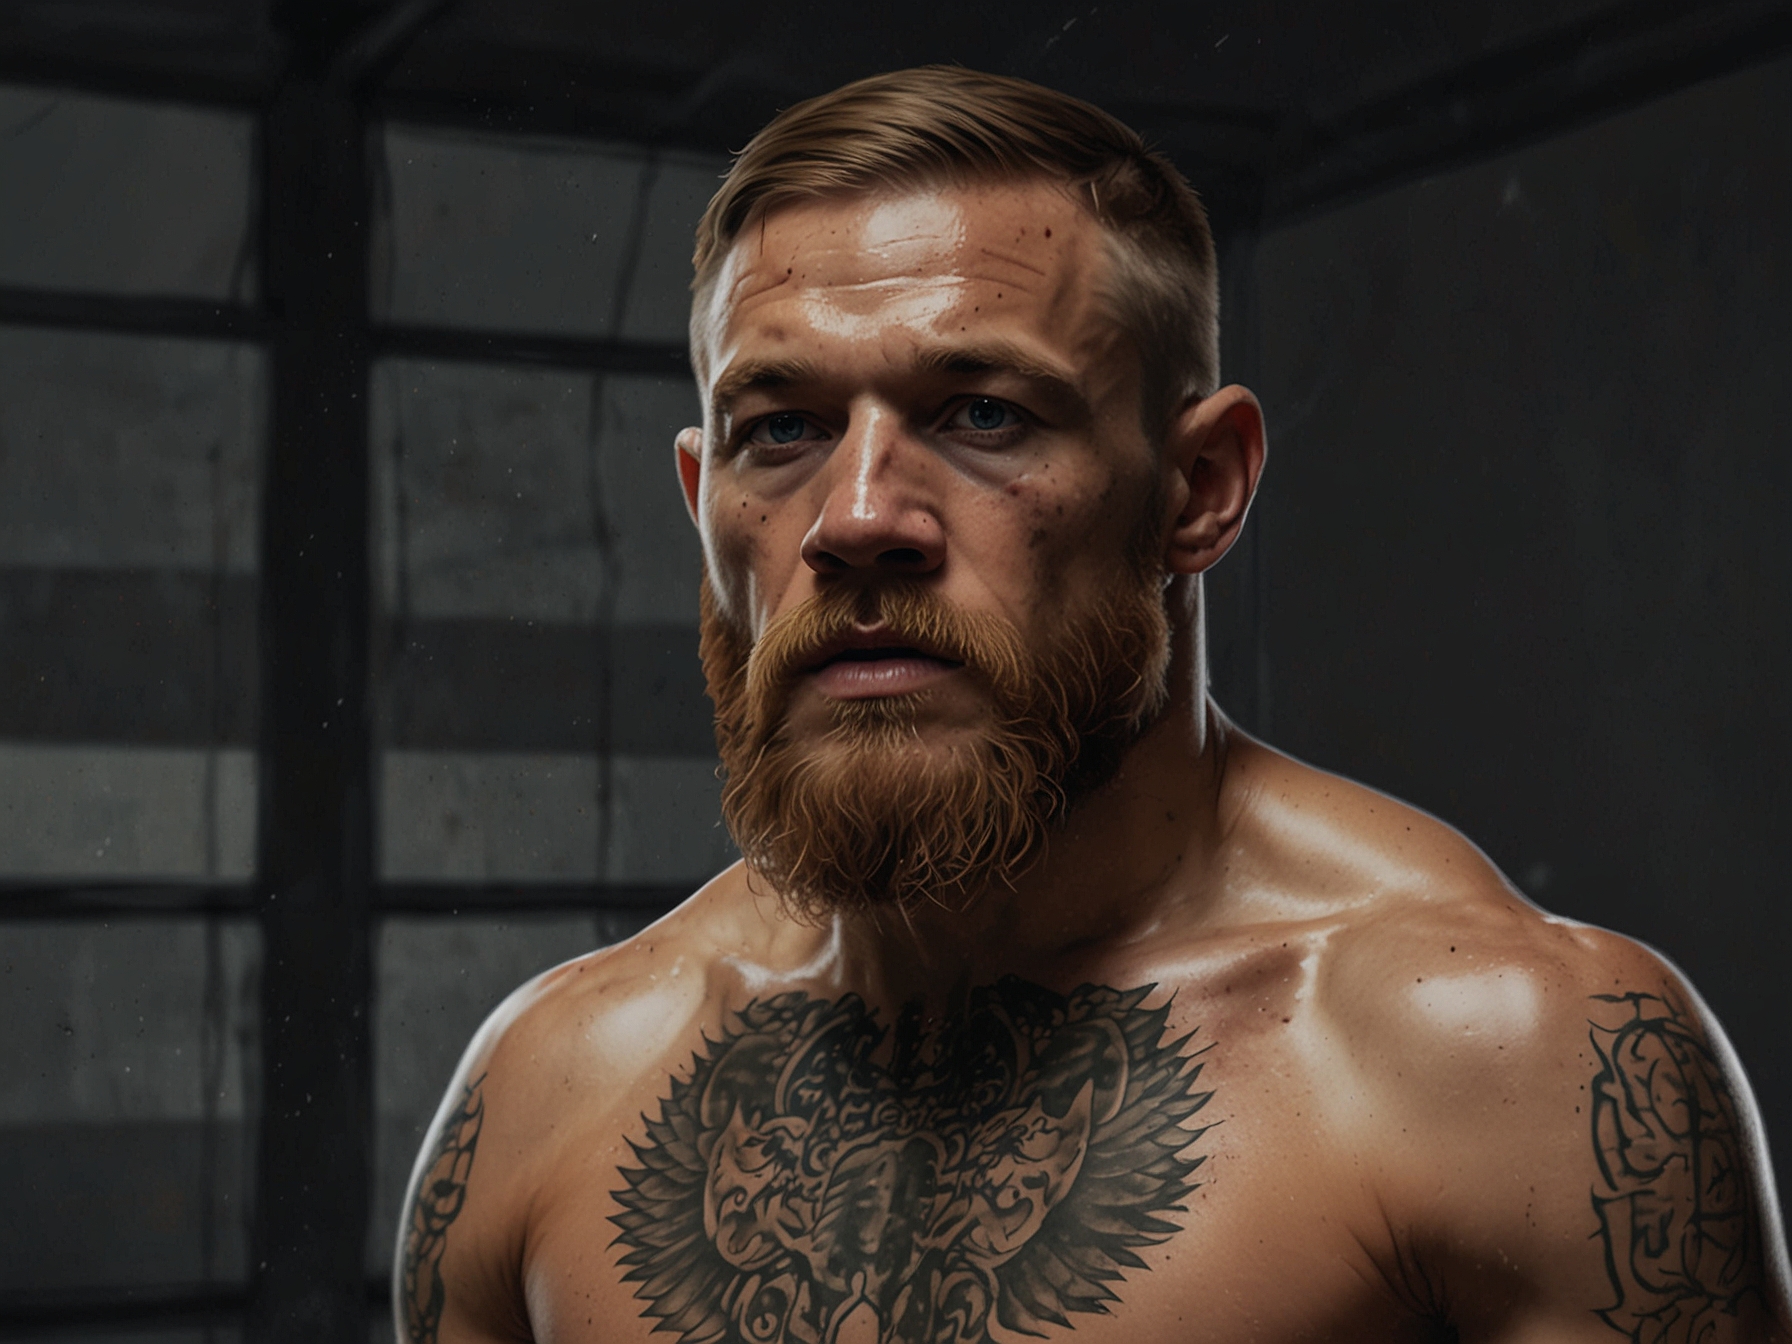 Conor McGregor in a training session, showing his determination and physical condition. Fans remain hopeful and speculate on his anticipated comeback as updates remain scarce.